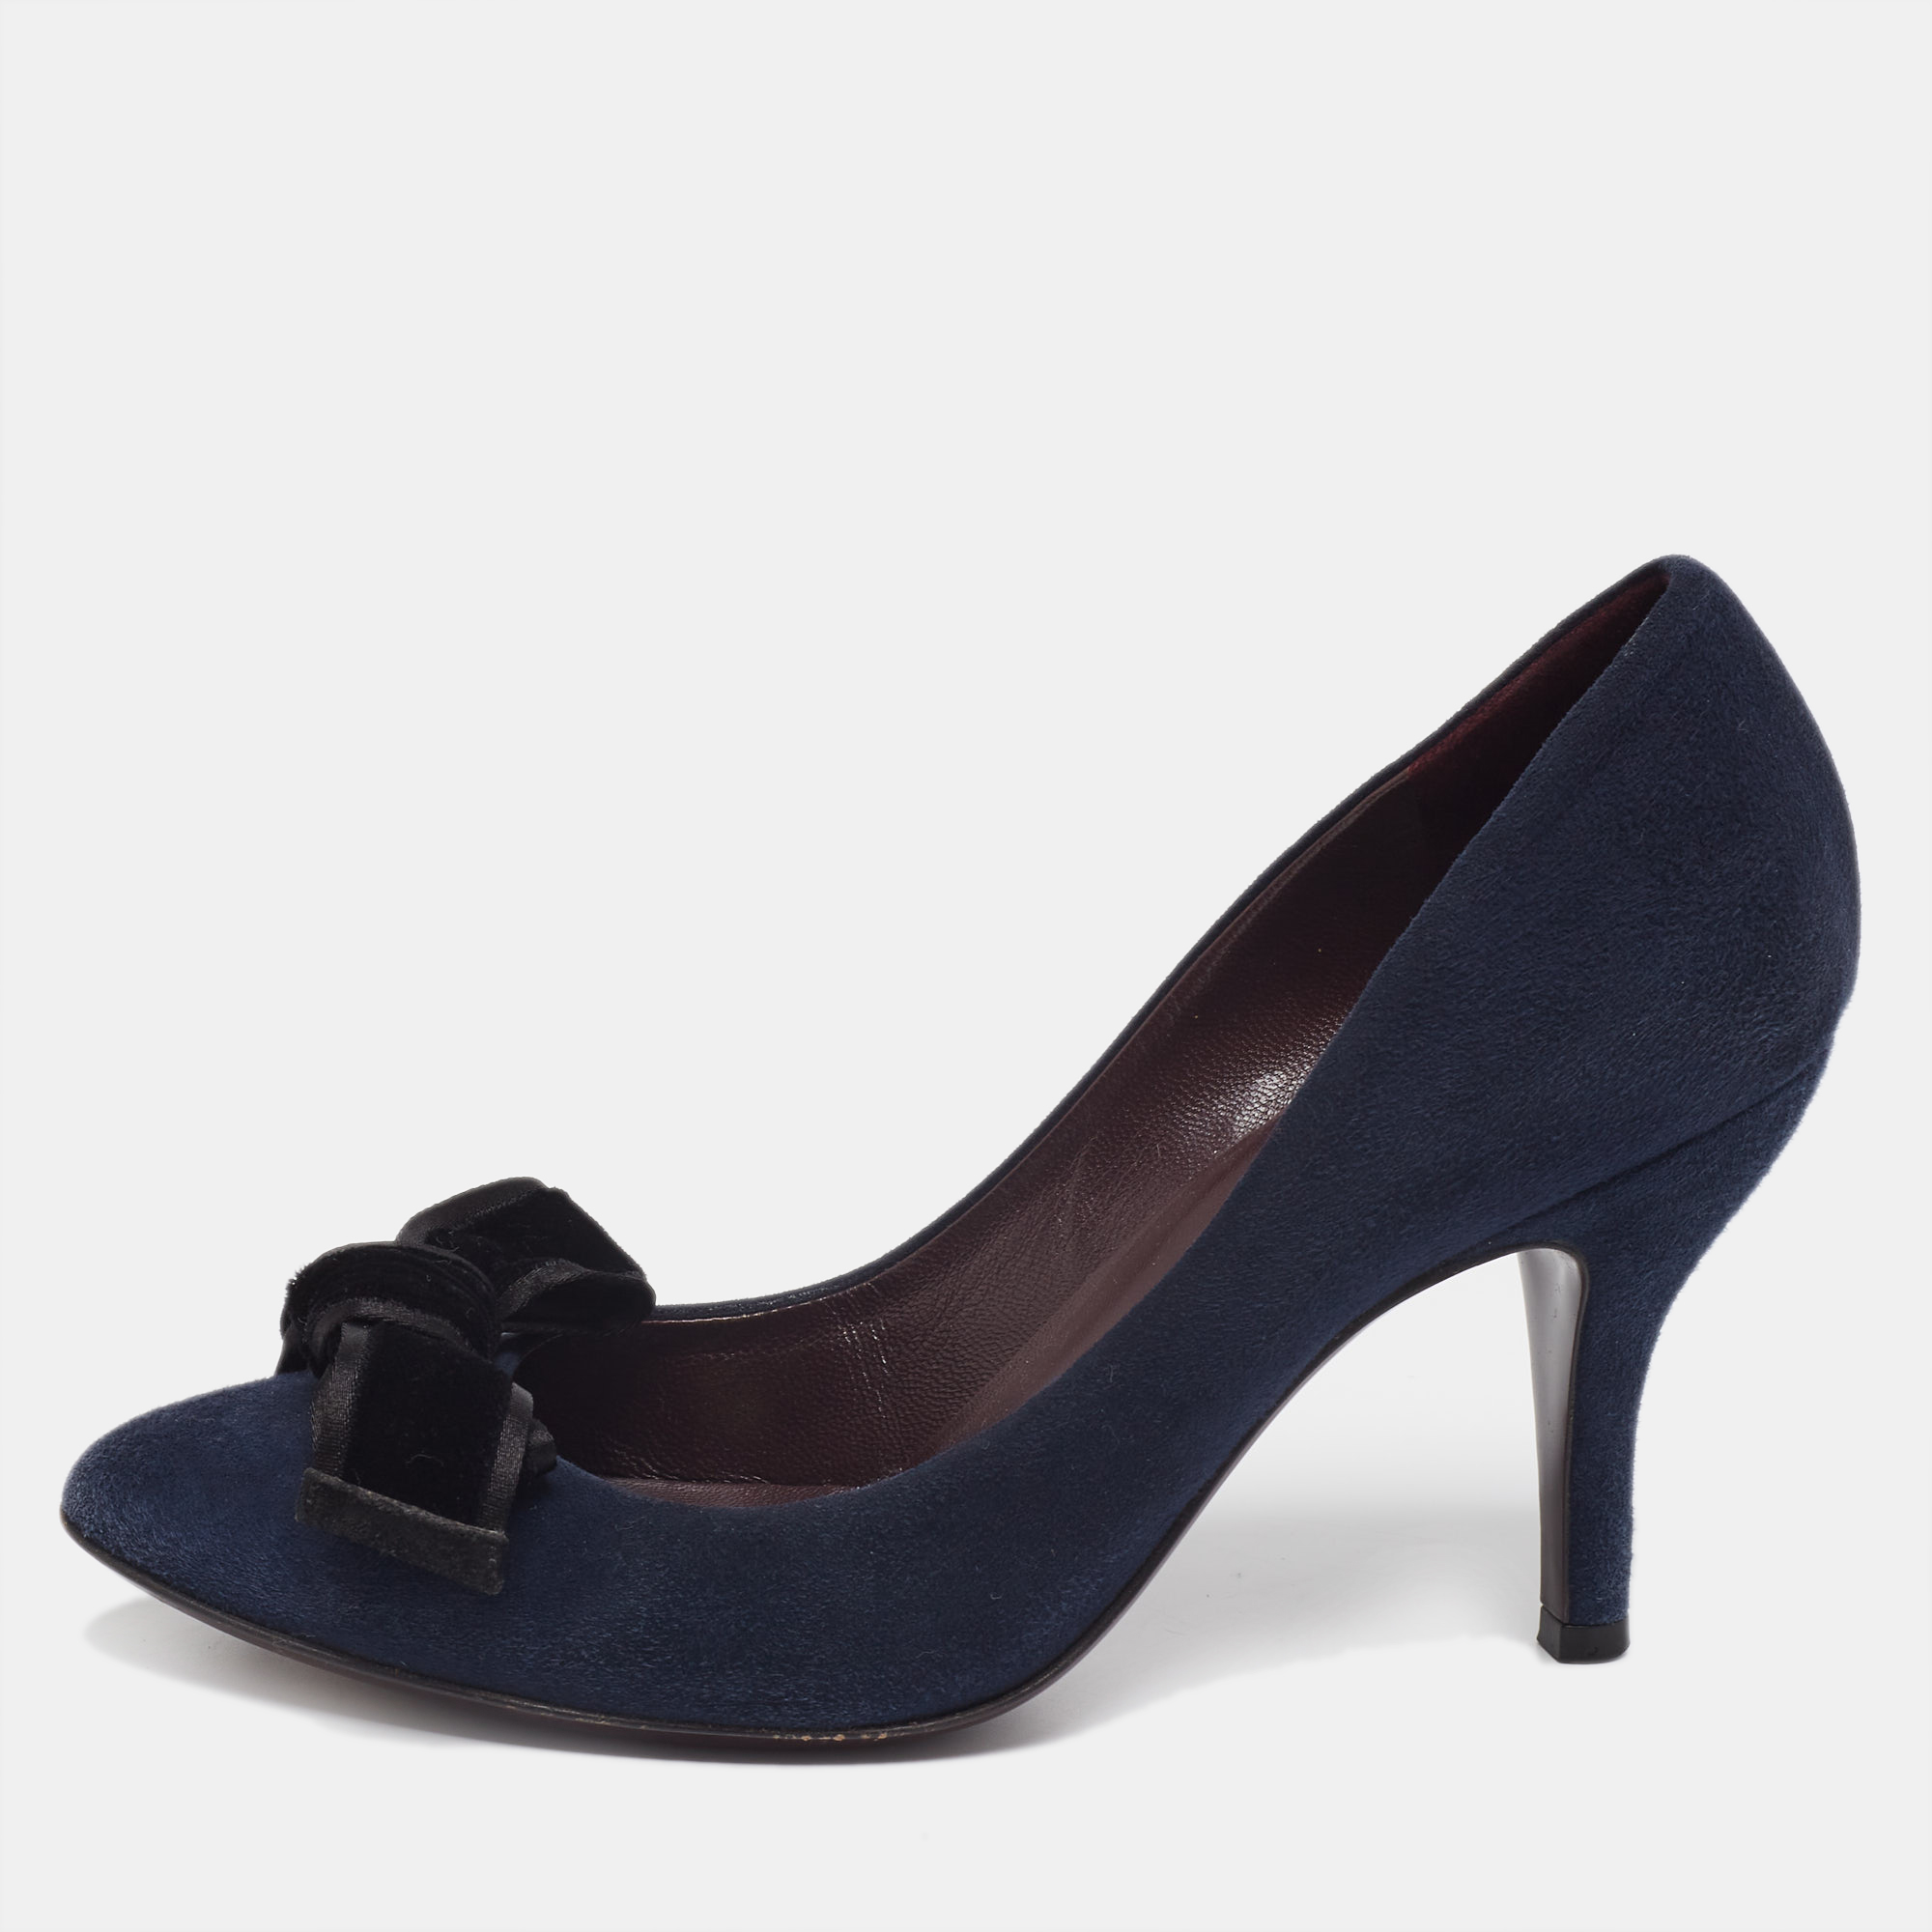 Gucci navy blue suede bow round toe pumps size 36.5